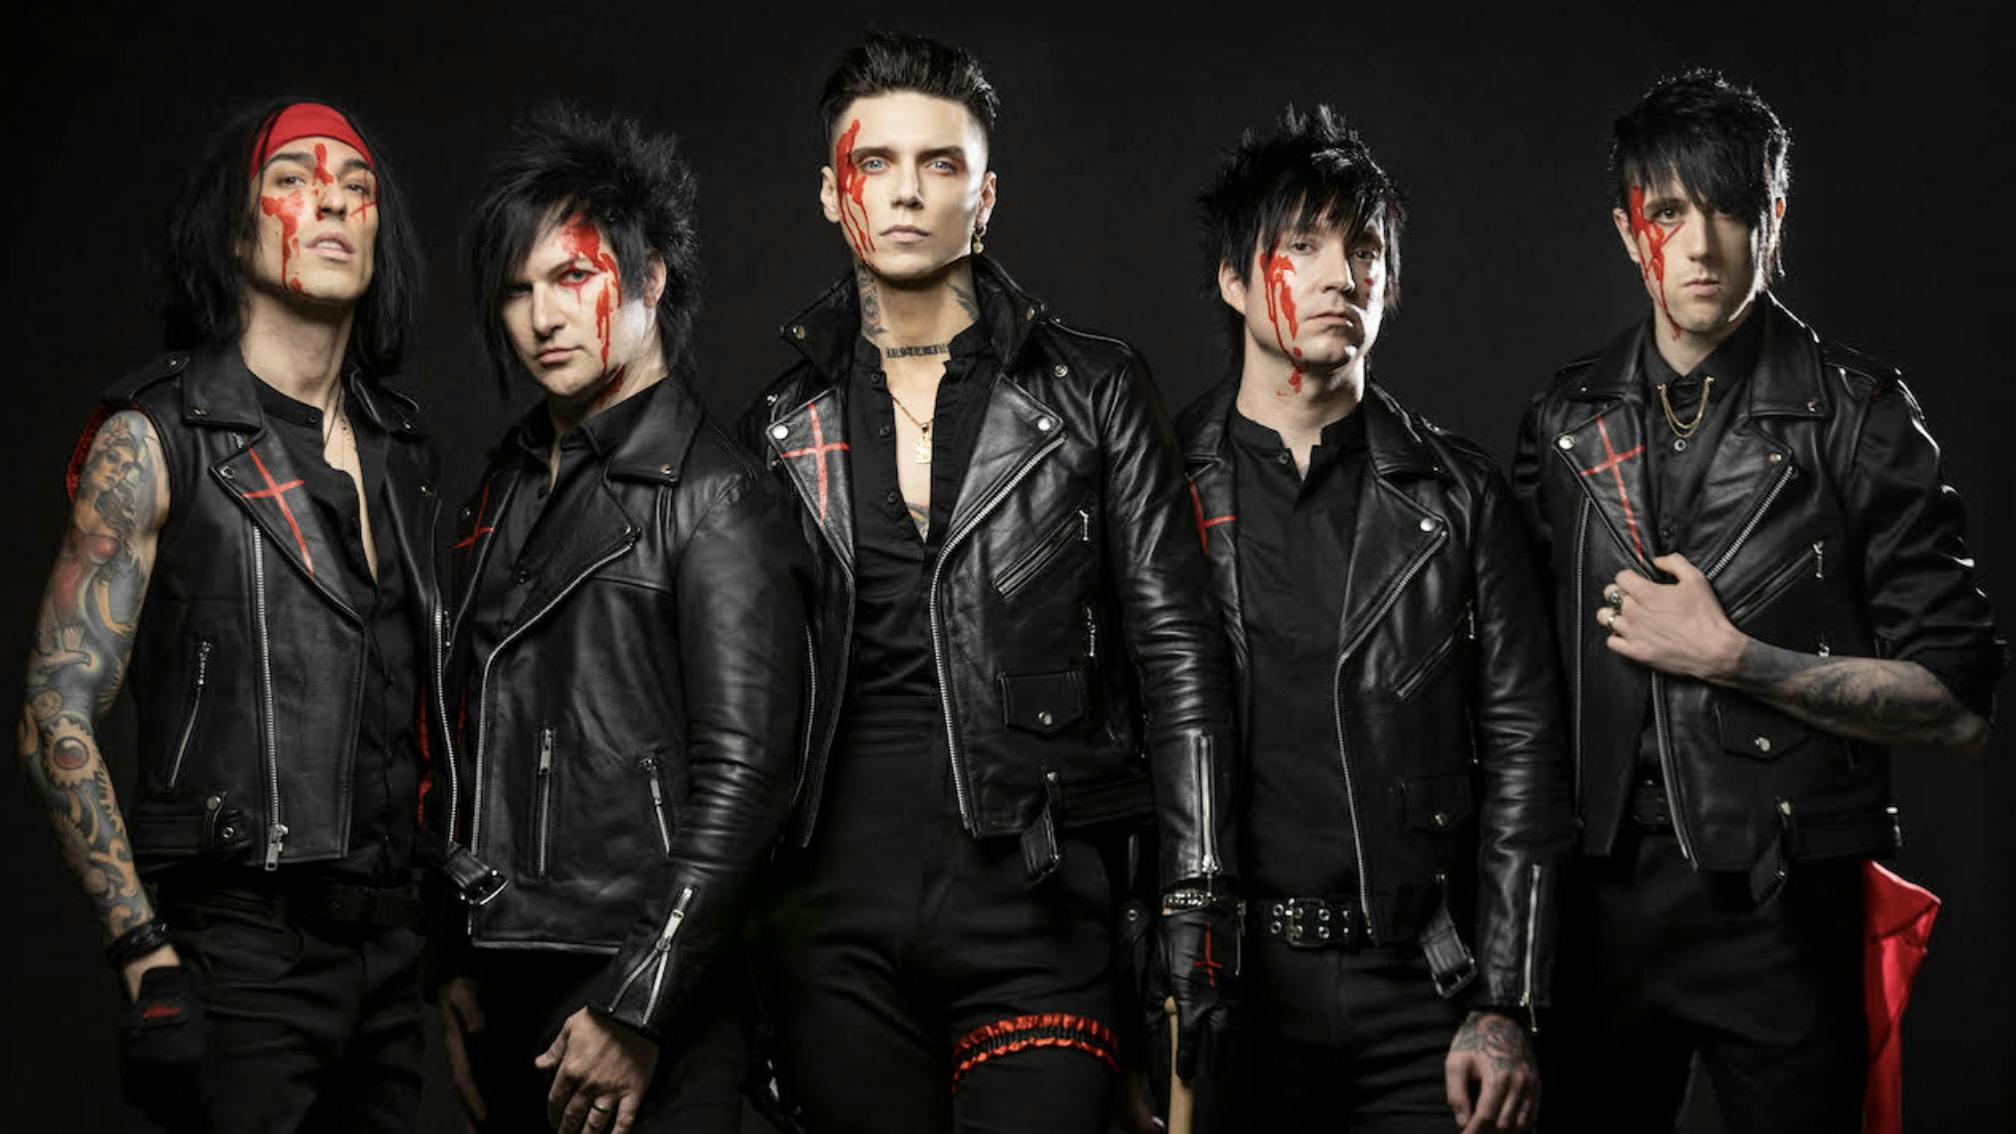 Here’s the setlist from the first night of Black Veil Brides’ UK tour